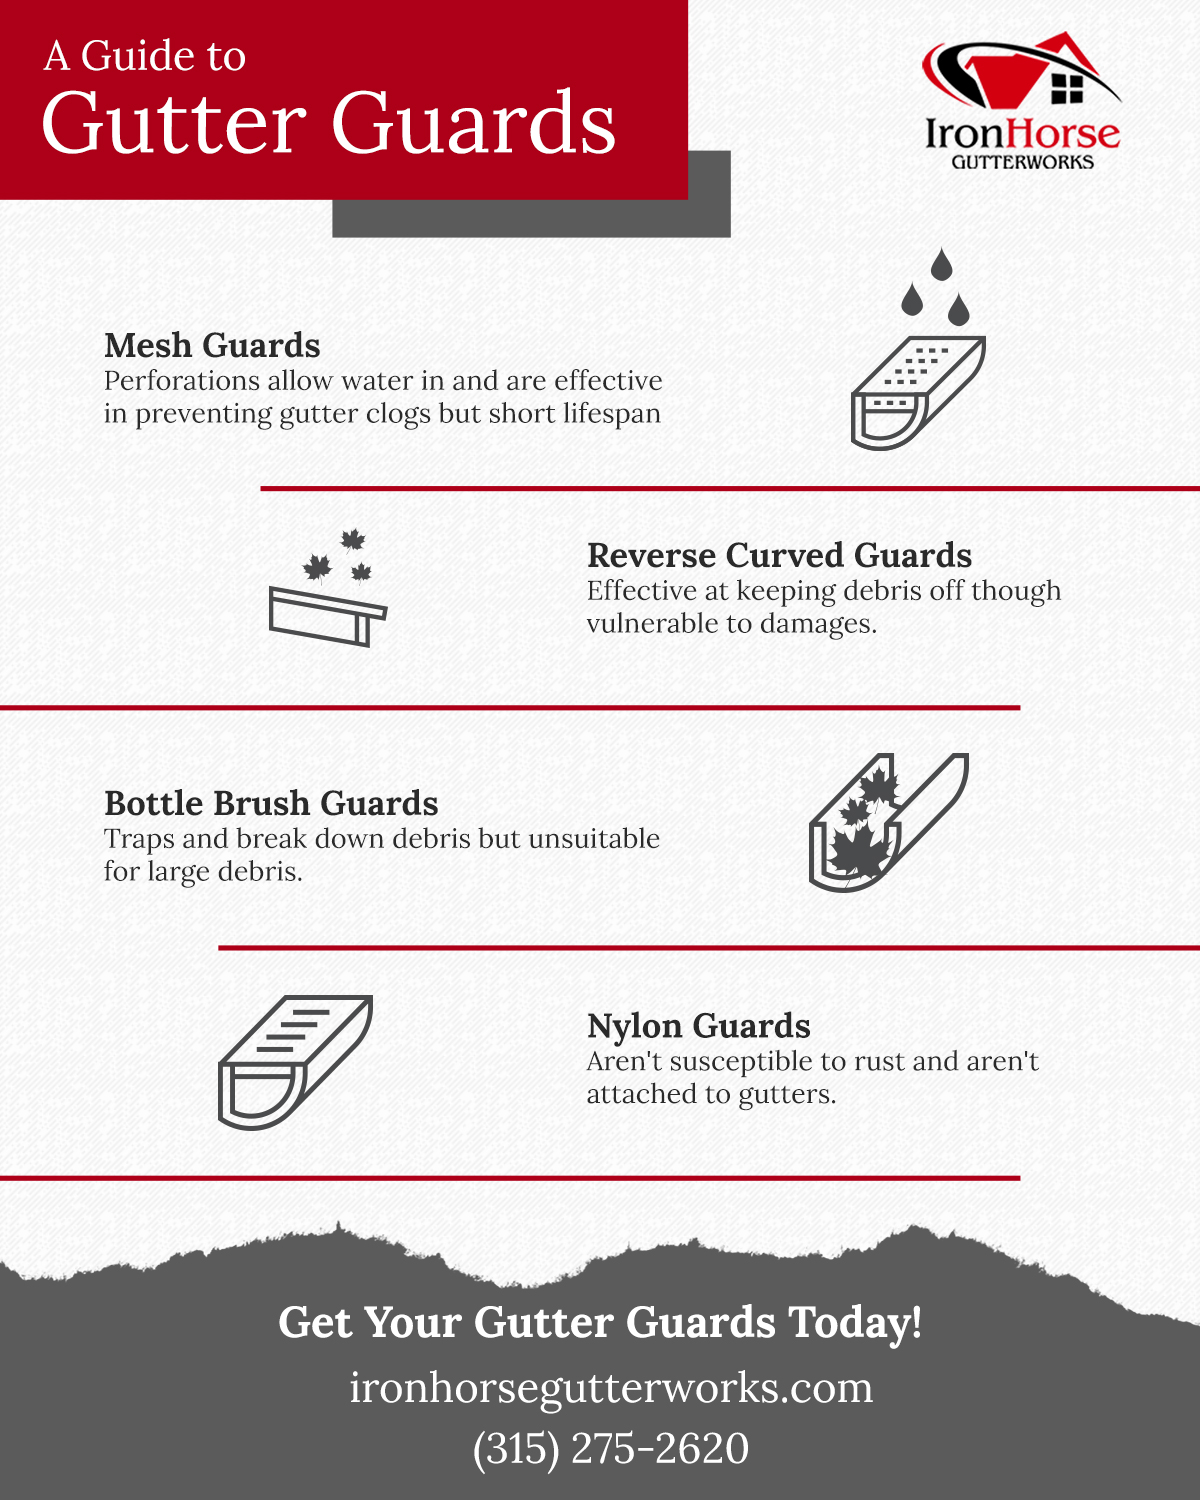 guide-to-gutter-guards-6164a9500a1ff